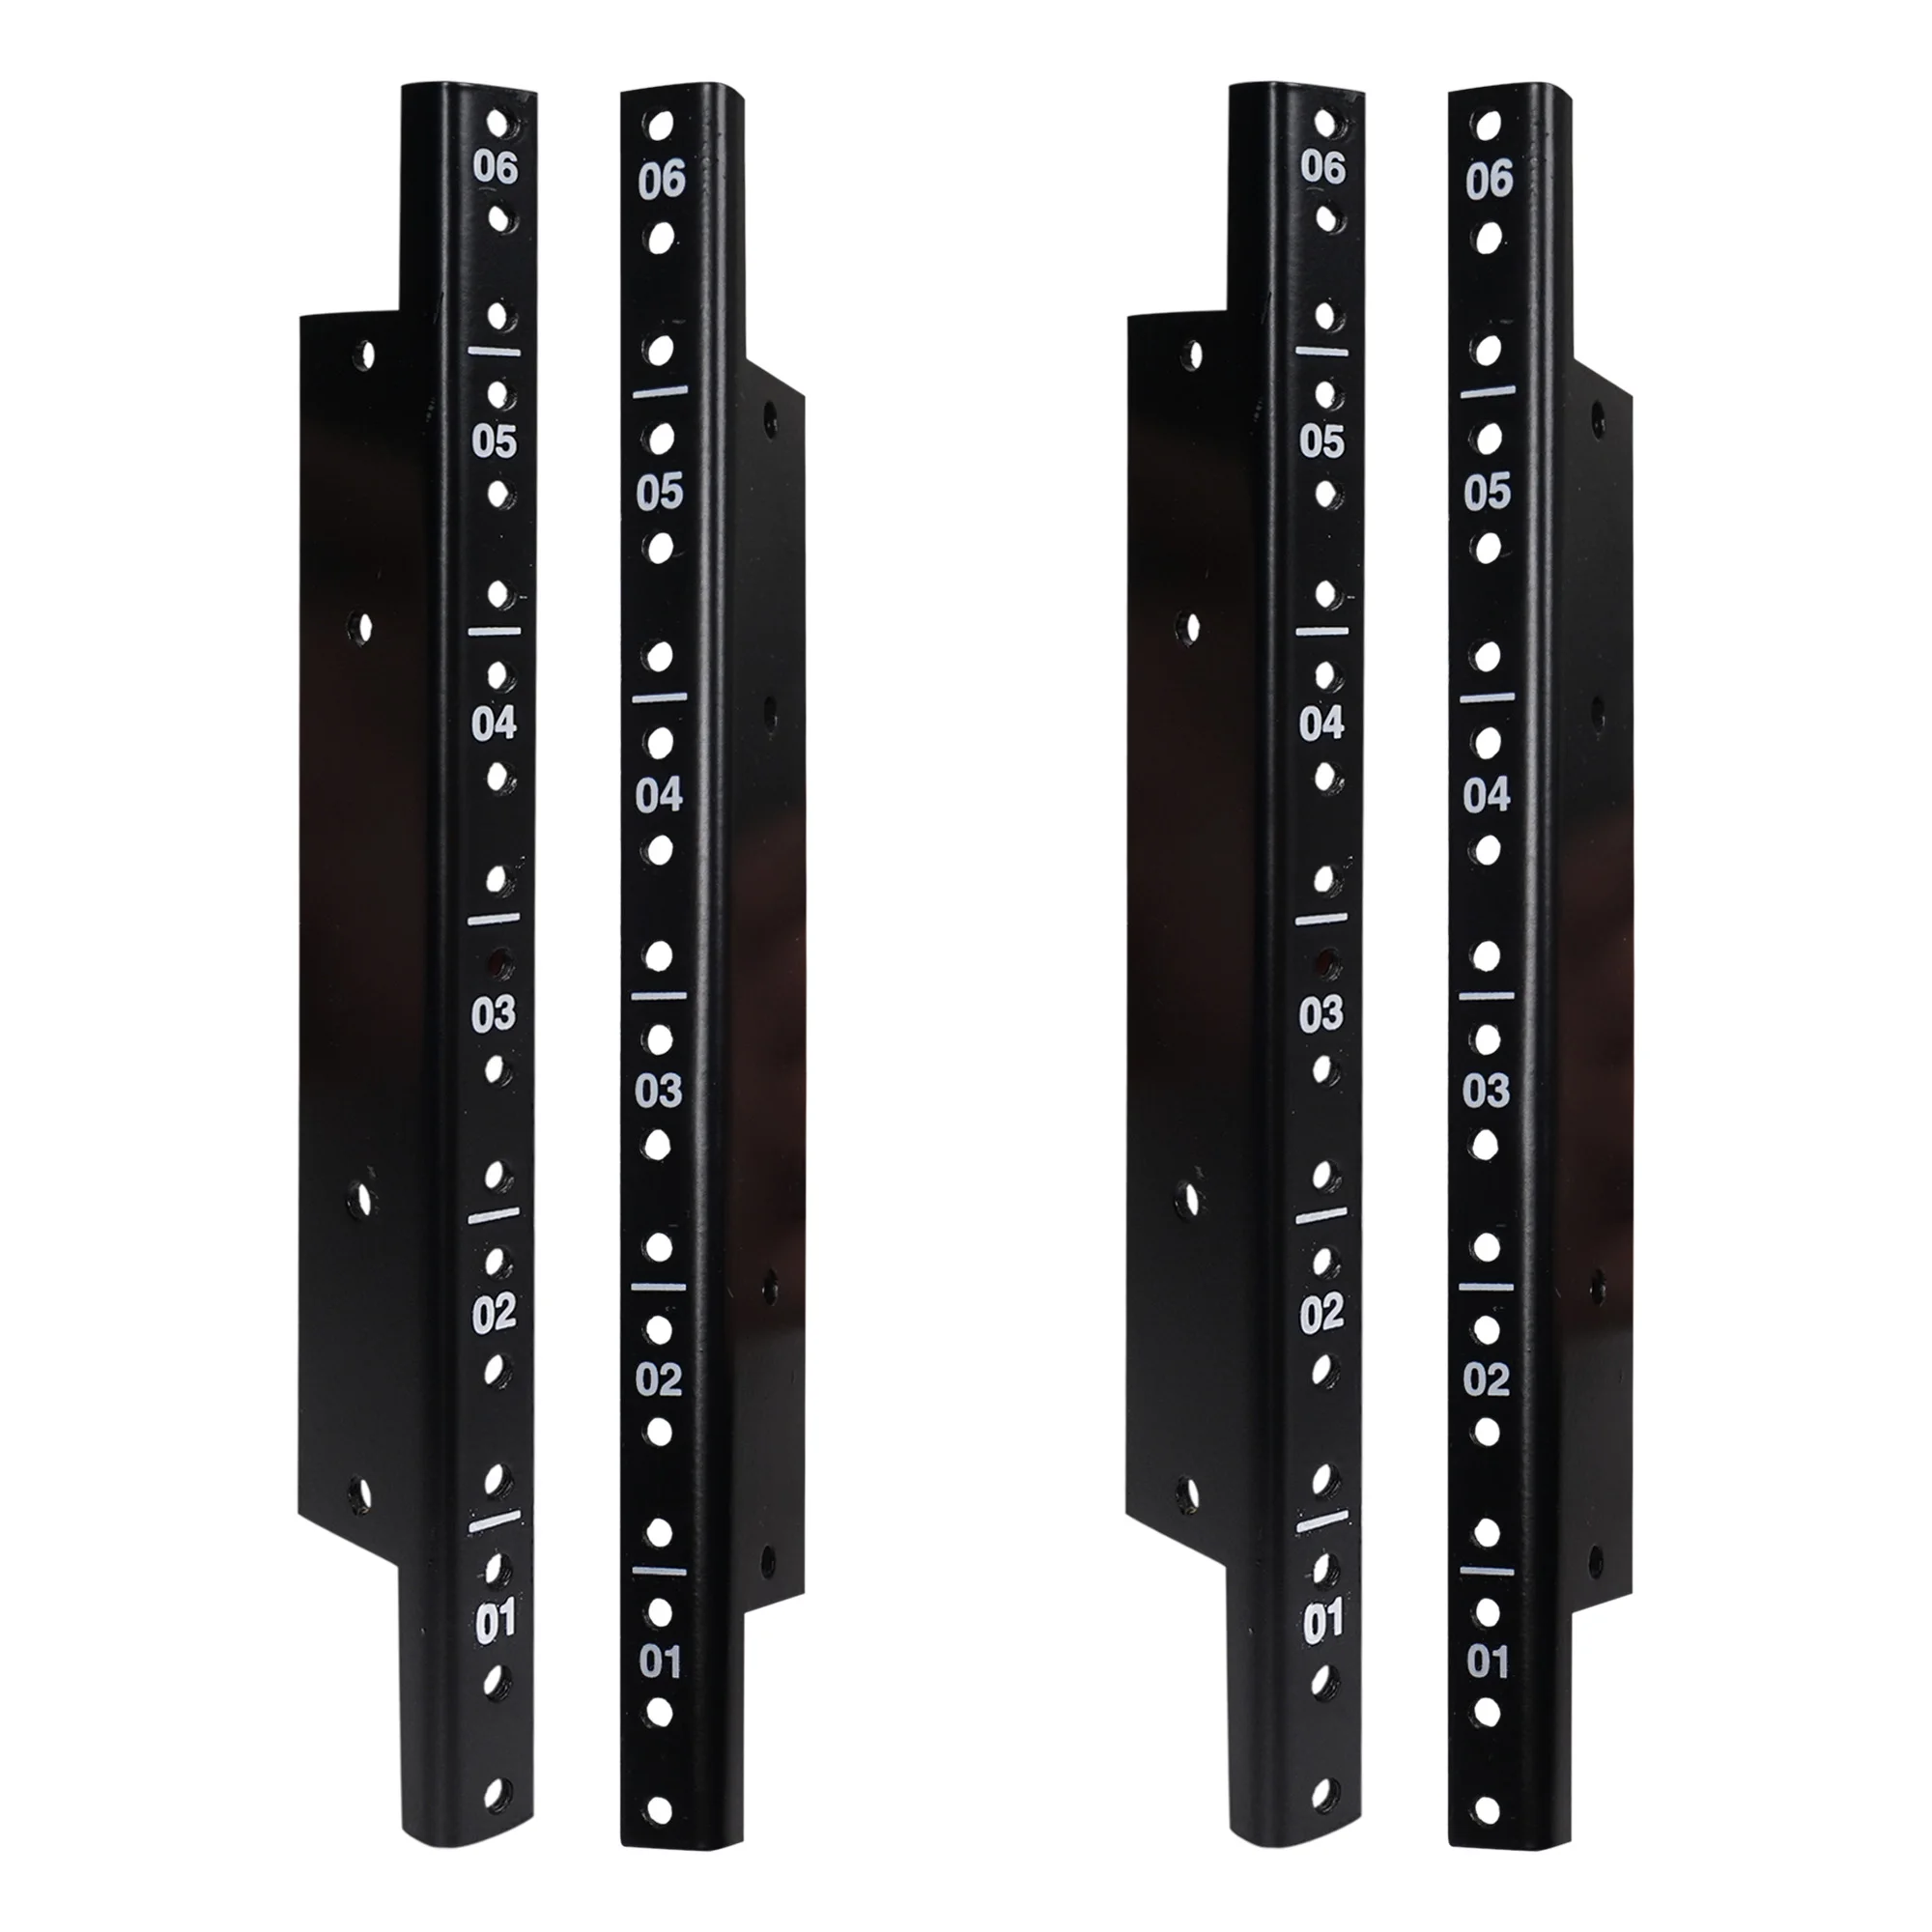 Sound Town 4-pack 6U Steel Rack Rails with Black Powder Coated Finish and Screws (ST-RR-06UX2)